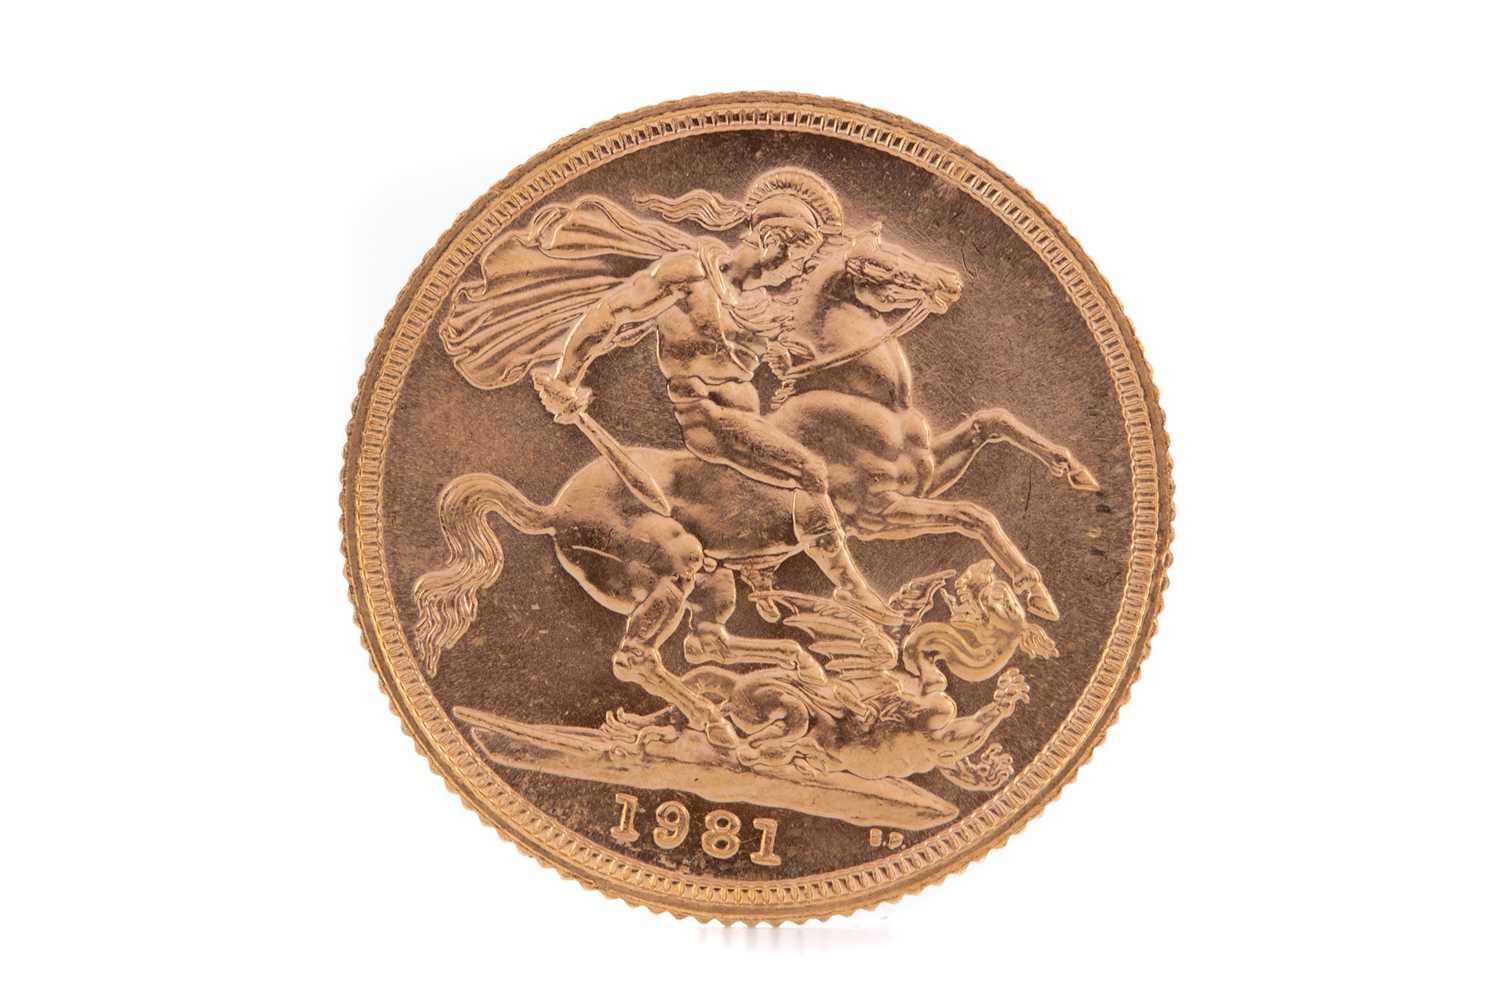 Lot 81 - AN ELIZABETH II GOLD SOVEREIGN DATED 1981